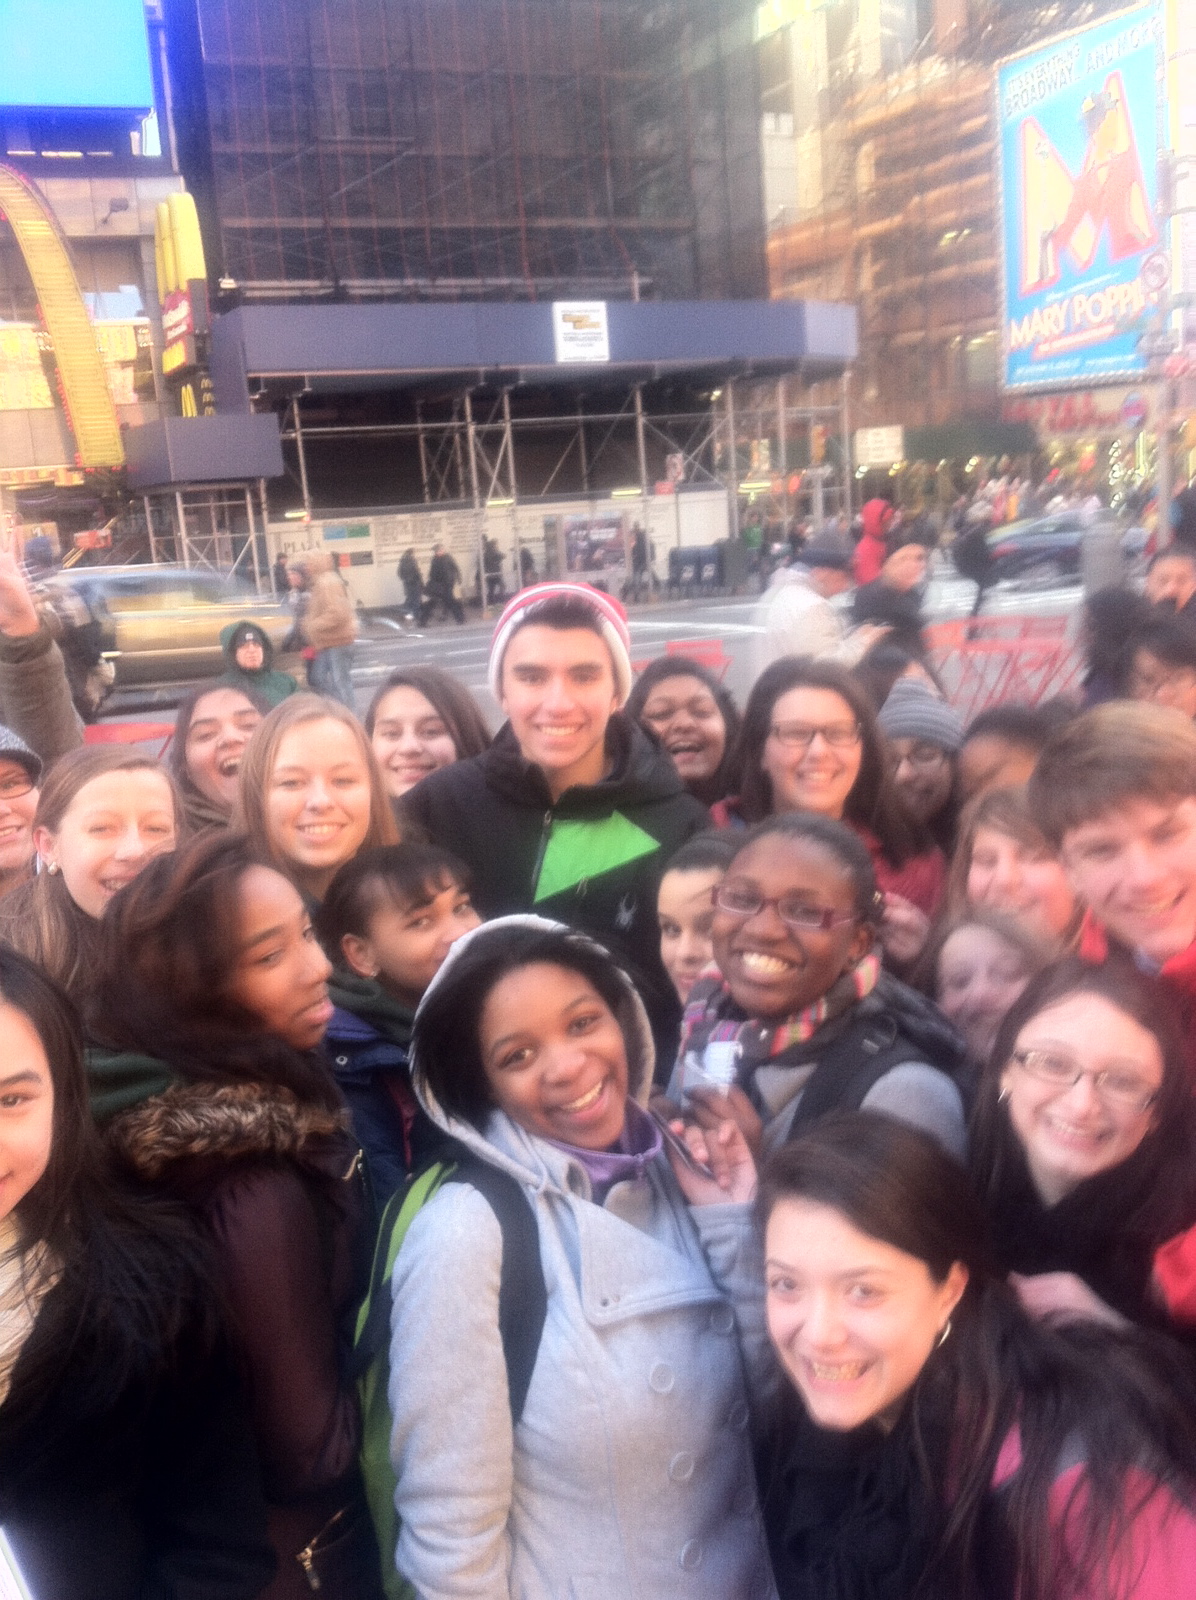 Christopher mobbed by fans in Times Square feb 2013